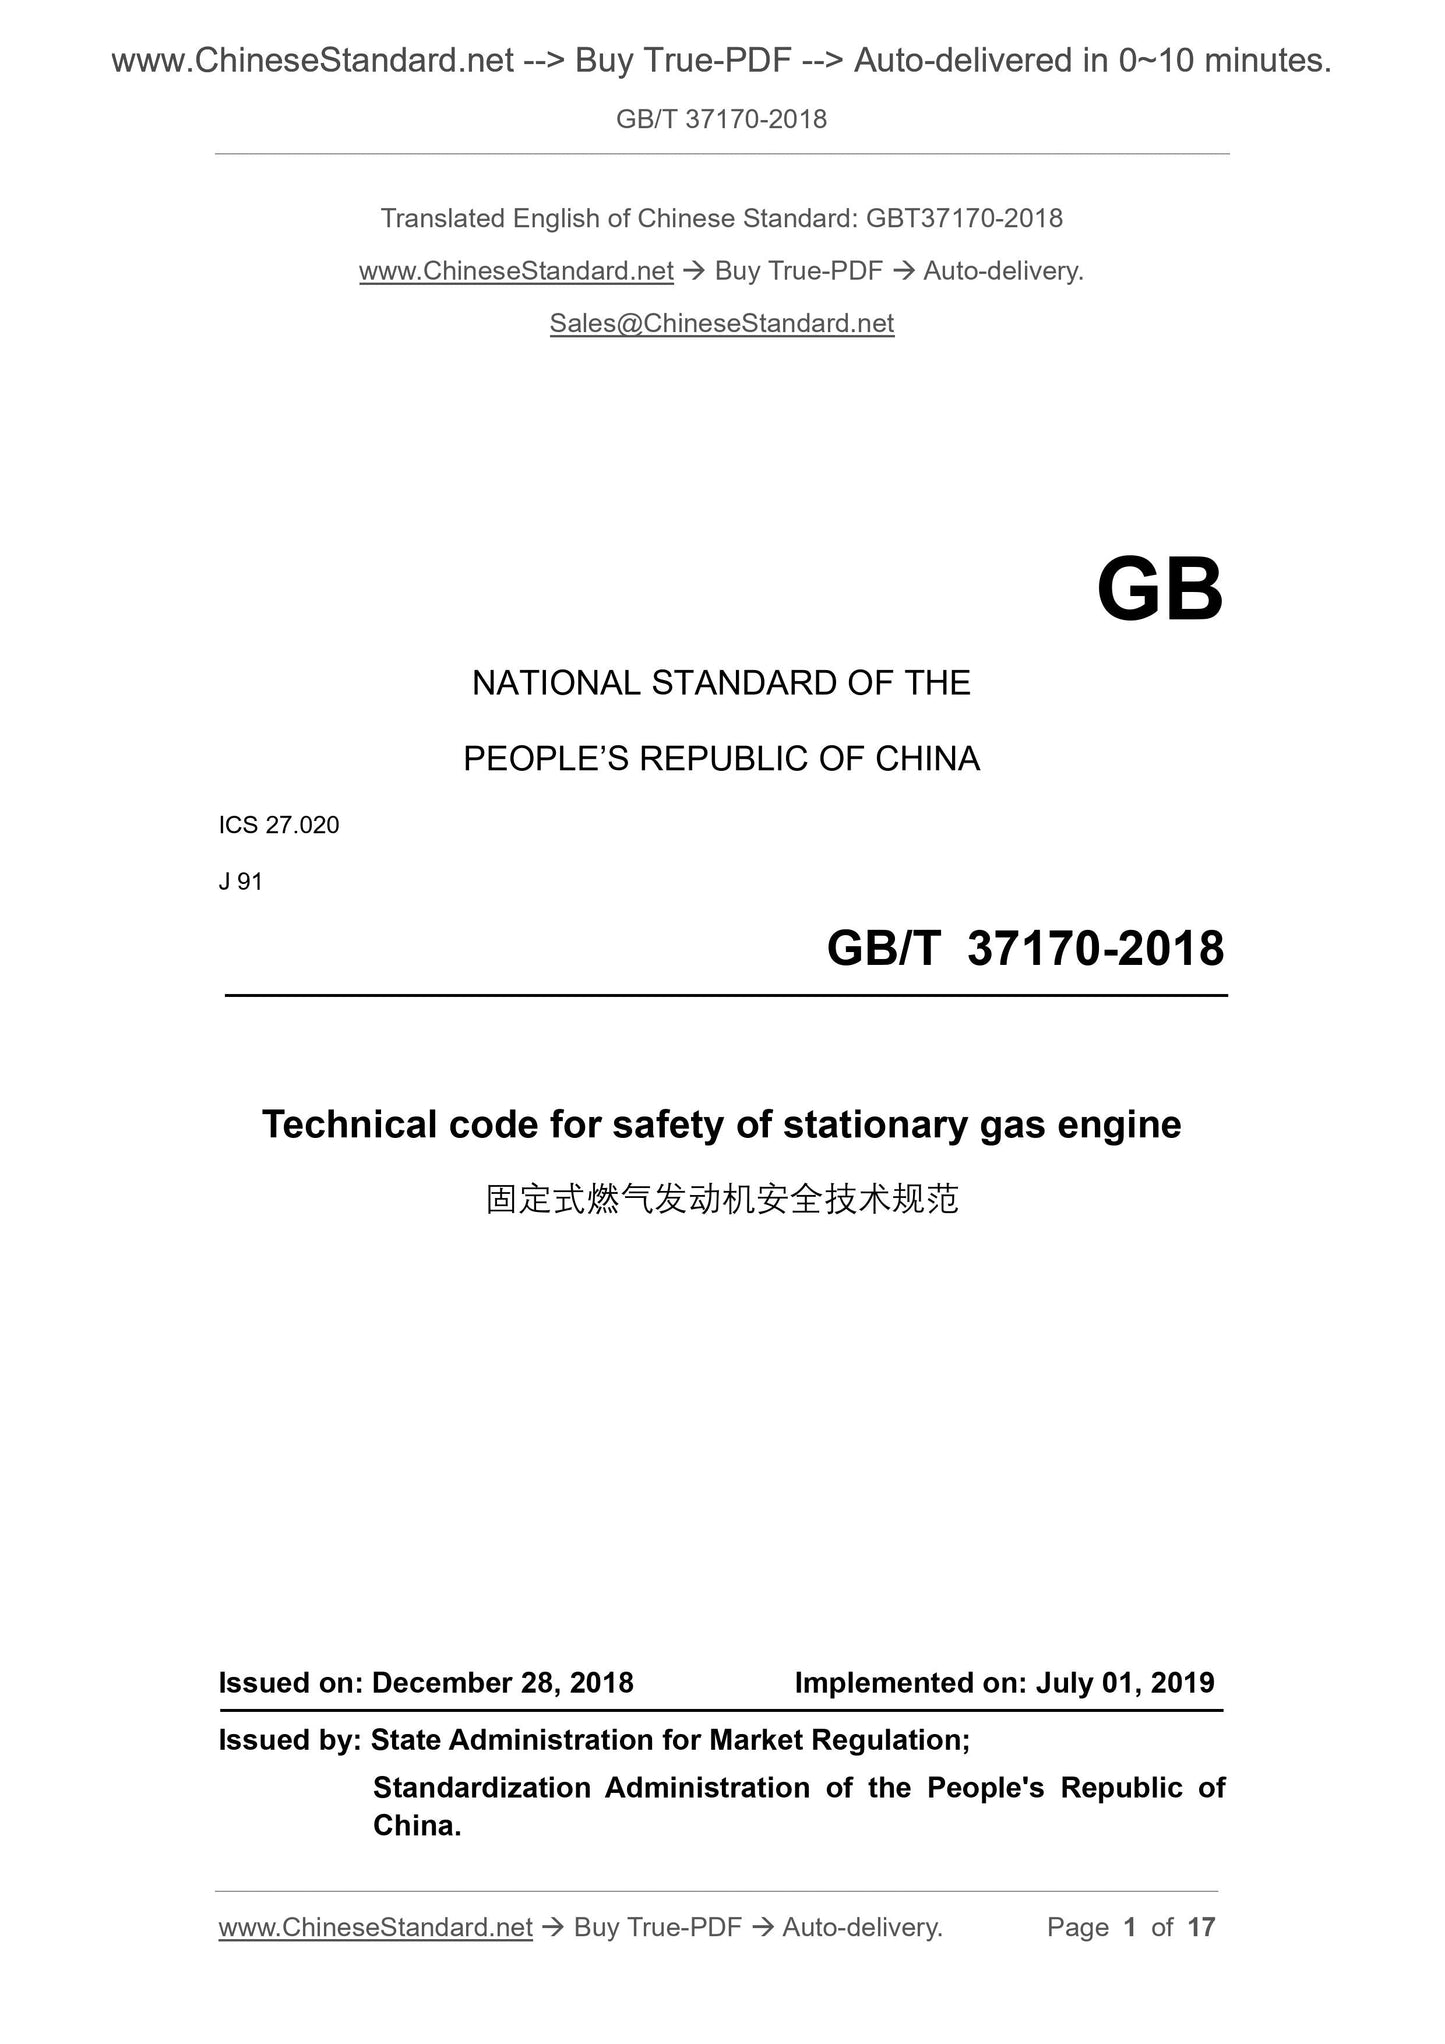 GB/T 37170-2018 Page 1